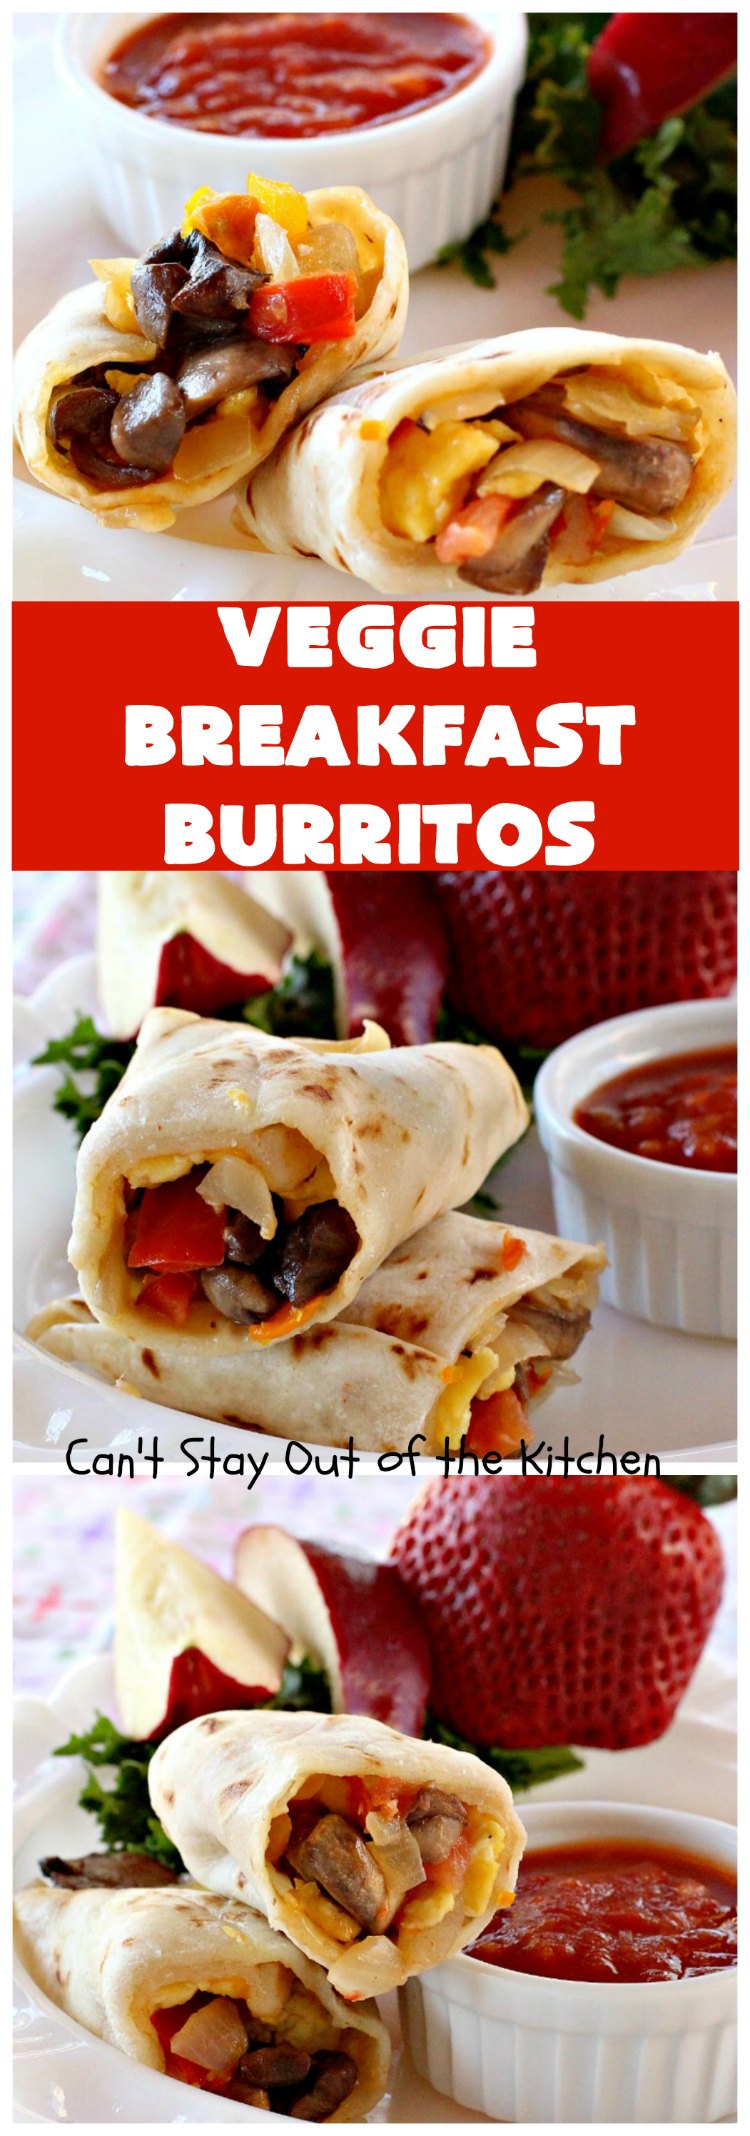 Veggie Breakfast Burritos | Can't Stay Out of the Kitchen | these delicious #burritos are terrific for on-the-go breakfasts. They can be refrigerated or frozen and microwaved just before you're heading out the door! This #healthy #breakfast option is wonderful for company or #MeatlessMondays too. #tomatoes #bellpeppers #mushrooms #tortillas #CheddarCheese #eggs #holiday #HolidayBreakfast #VeggieBreakfastBurritos #BreakfastBurritos #HealthyBreakfastBurritos